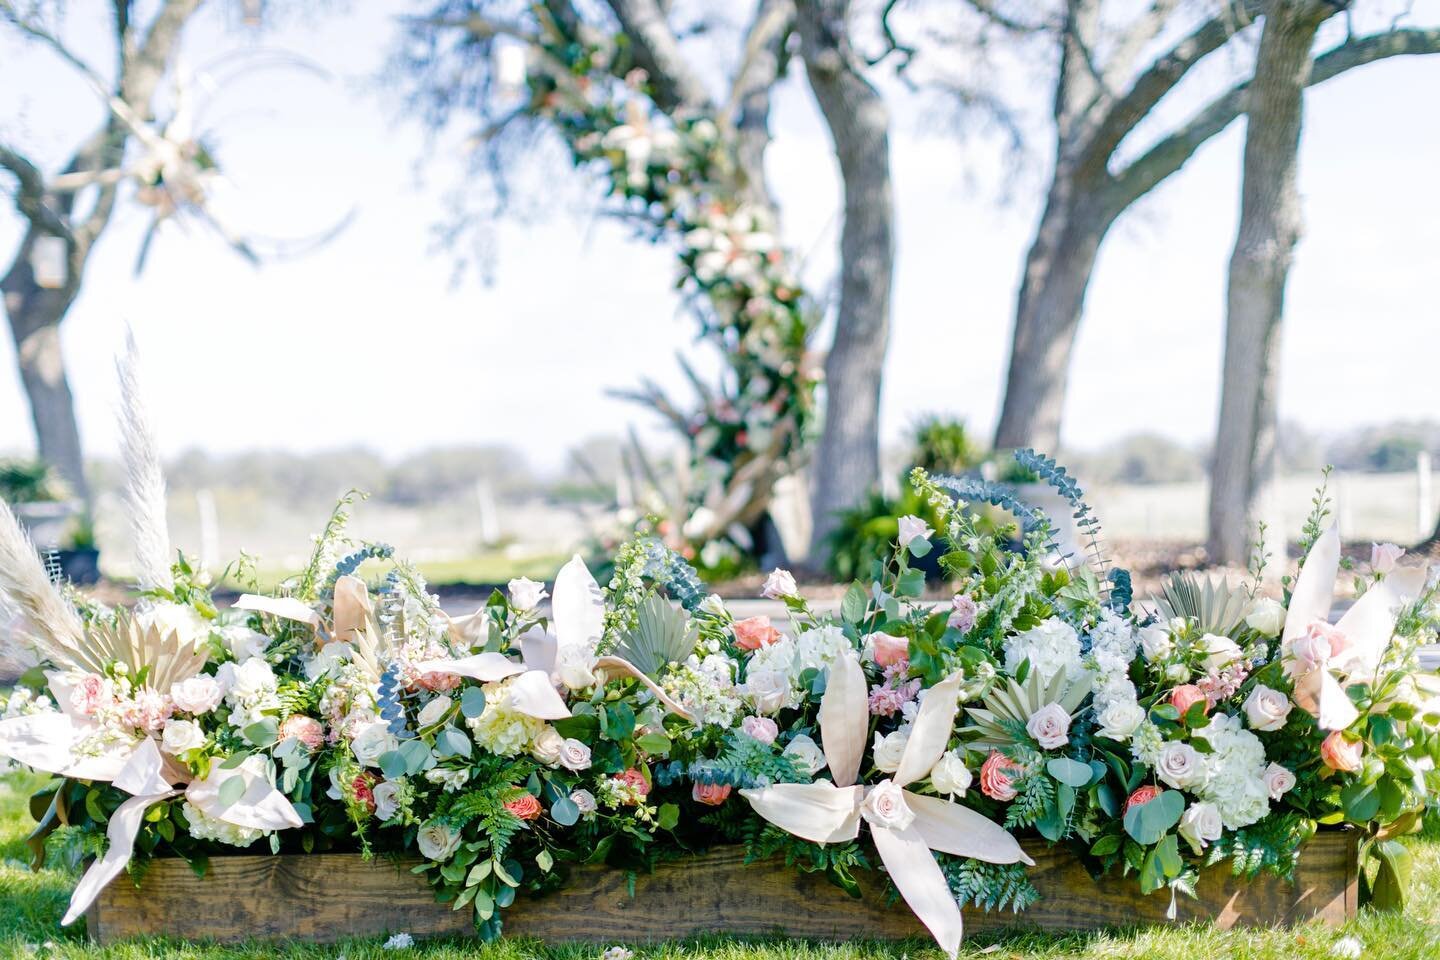 &ldquo;We shouldn&rsquo;t be afraid to embrace whimsy, that nagging idea that life could be magical; it could be special if we were only willing to take a few risks.&rdquo; - Donald Miller

#copperandbirch #revelwilde #design #floristry #whimsy #cere